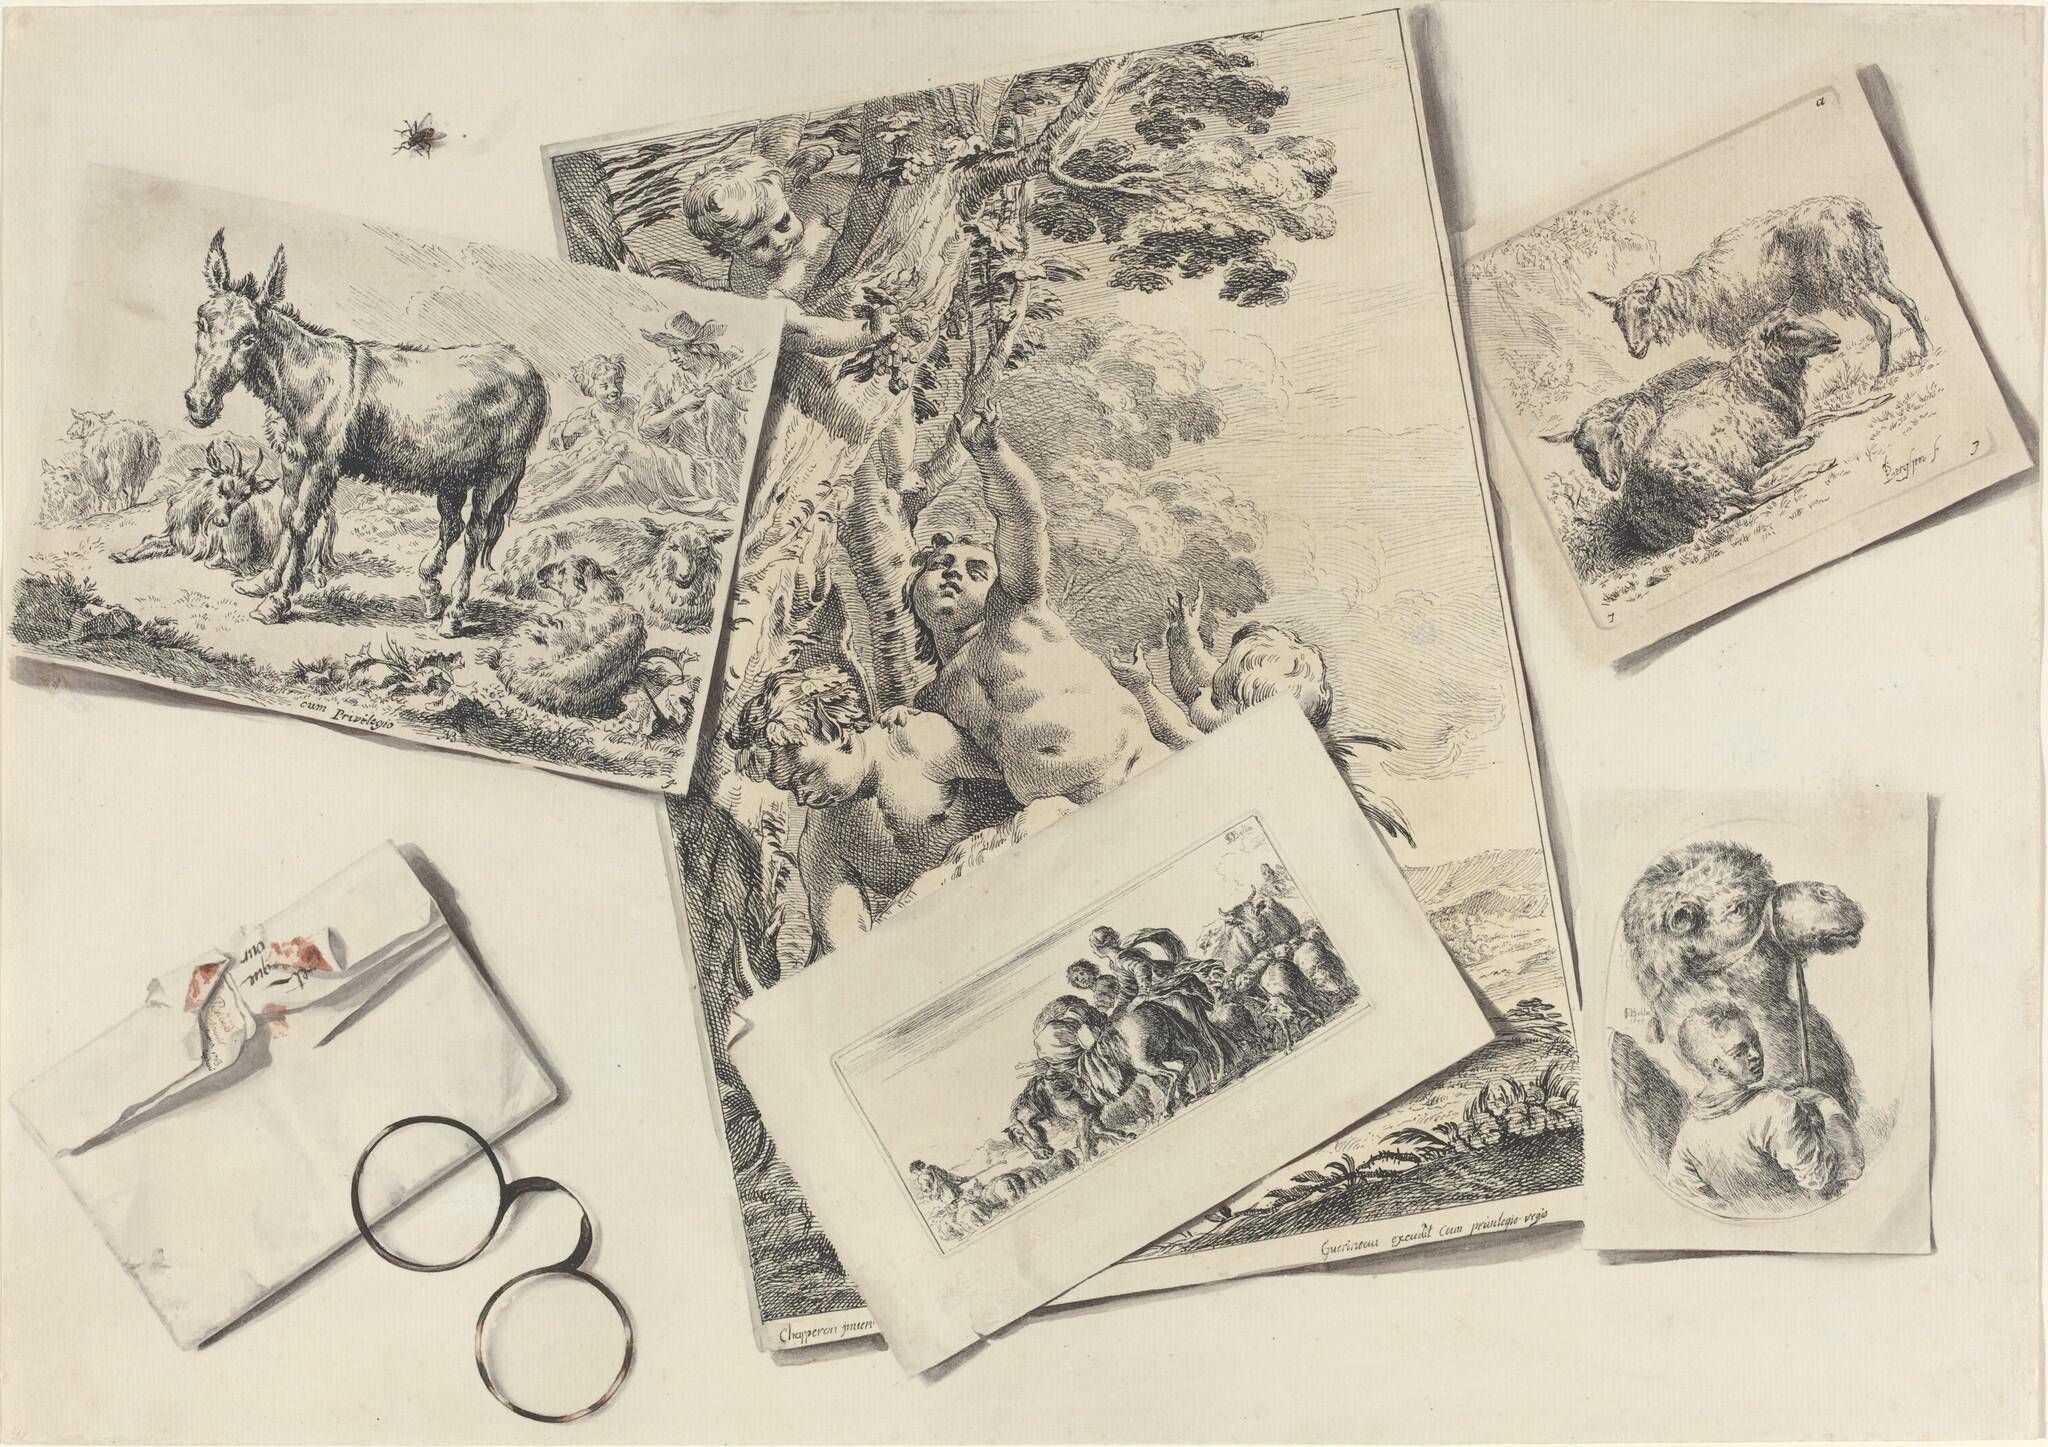 Trompe l'Oeil: Old Prints, a Torn Envelope with Horn-rimmed Glasses, and a Housefly